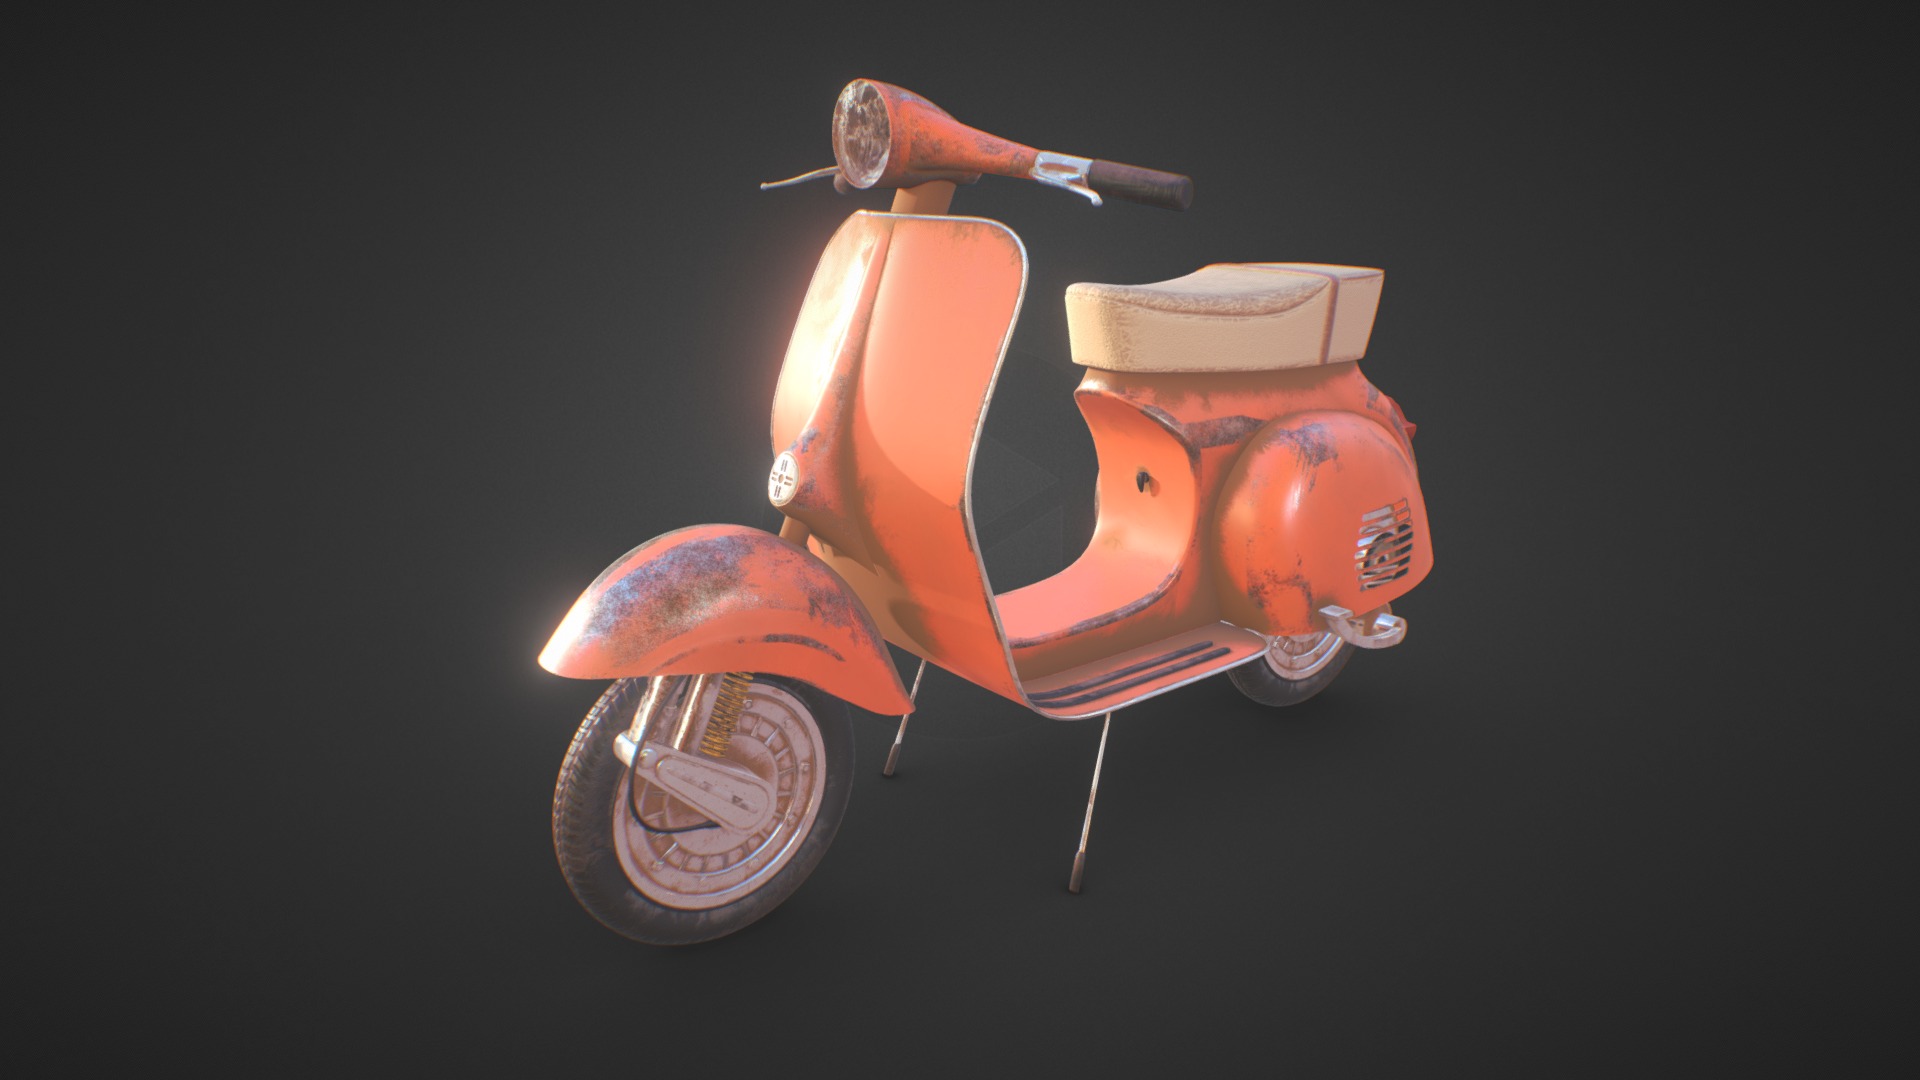 3D model vespa scooter - This is a 3D model of the vespa scooter. The 3D model is about a small orange and white scooter.